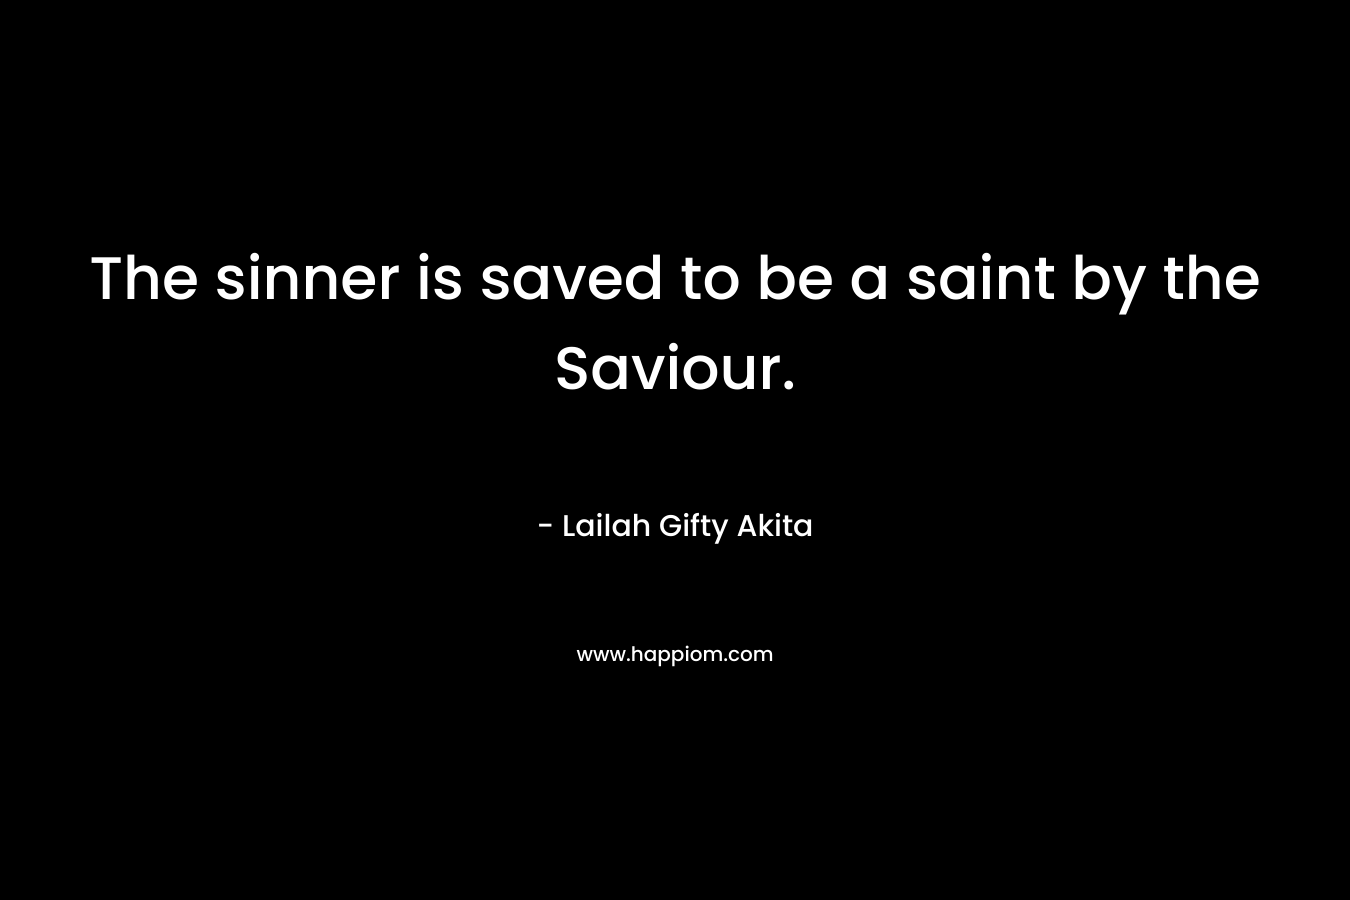 The sinner is saved to be a saint by the Saviour.